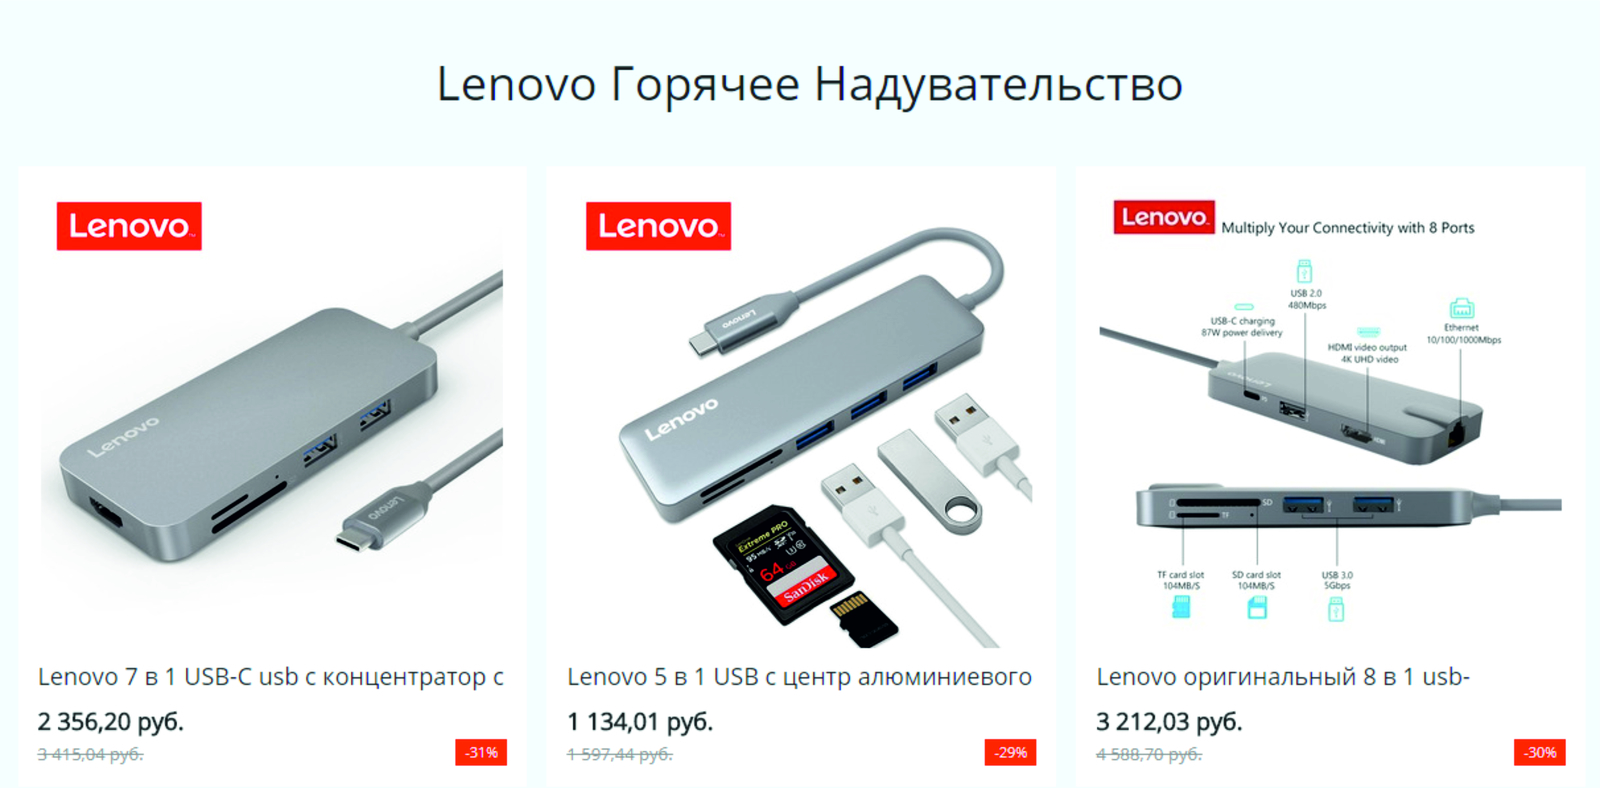 When Aliexpress knows better than to mess with Lenovo products... - AliExpress, Translation, , Lenovo